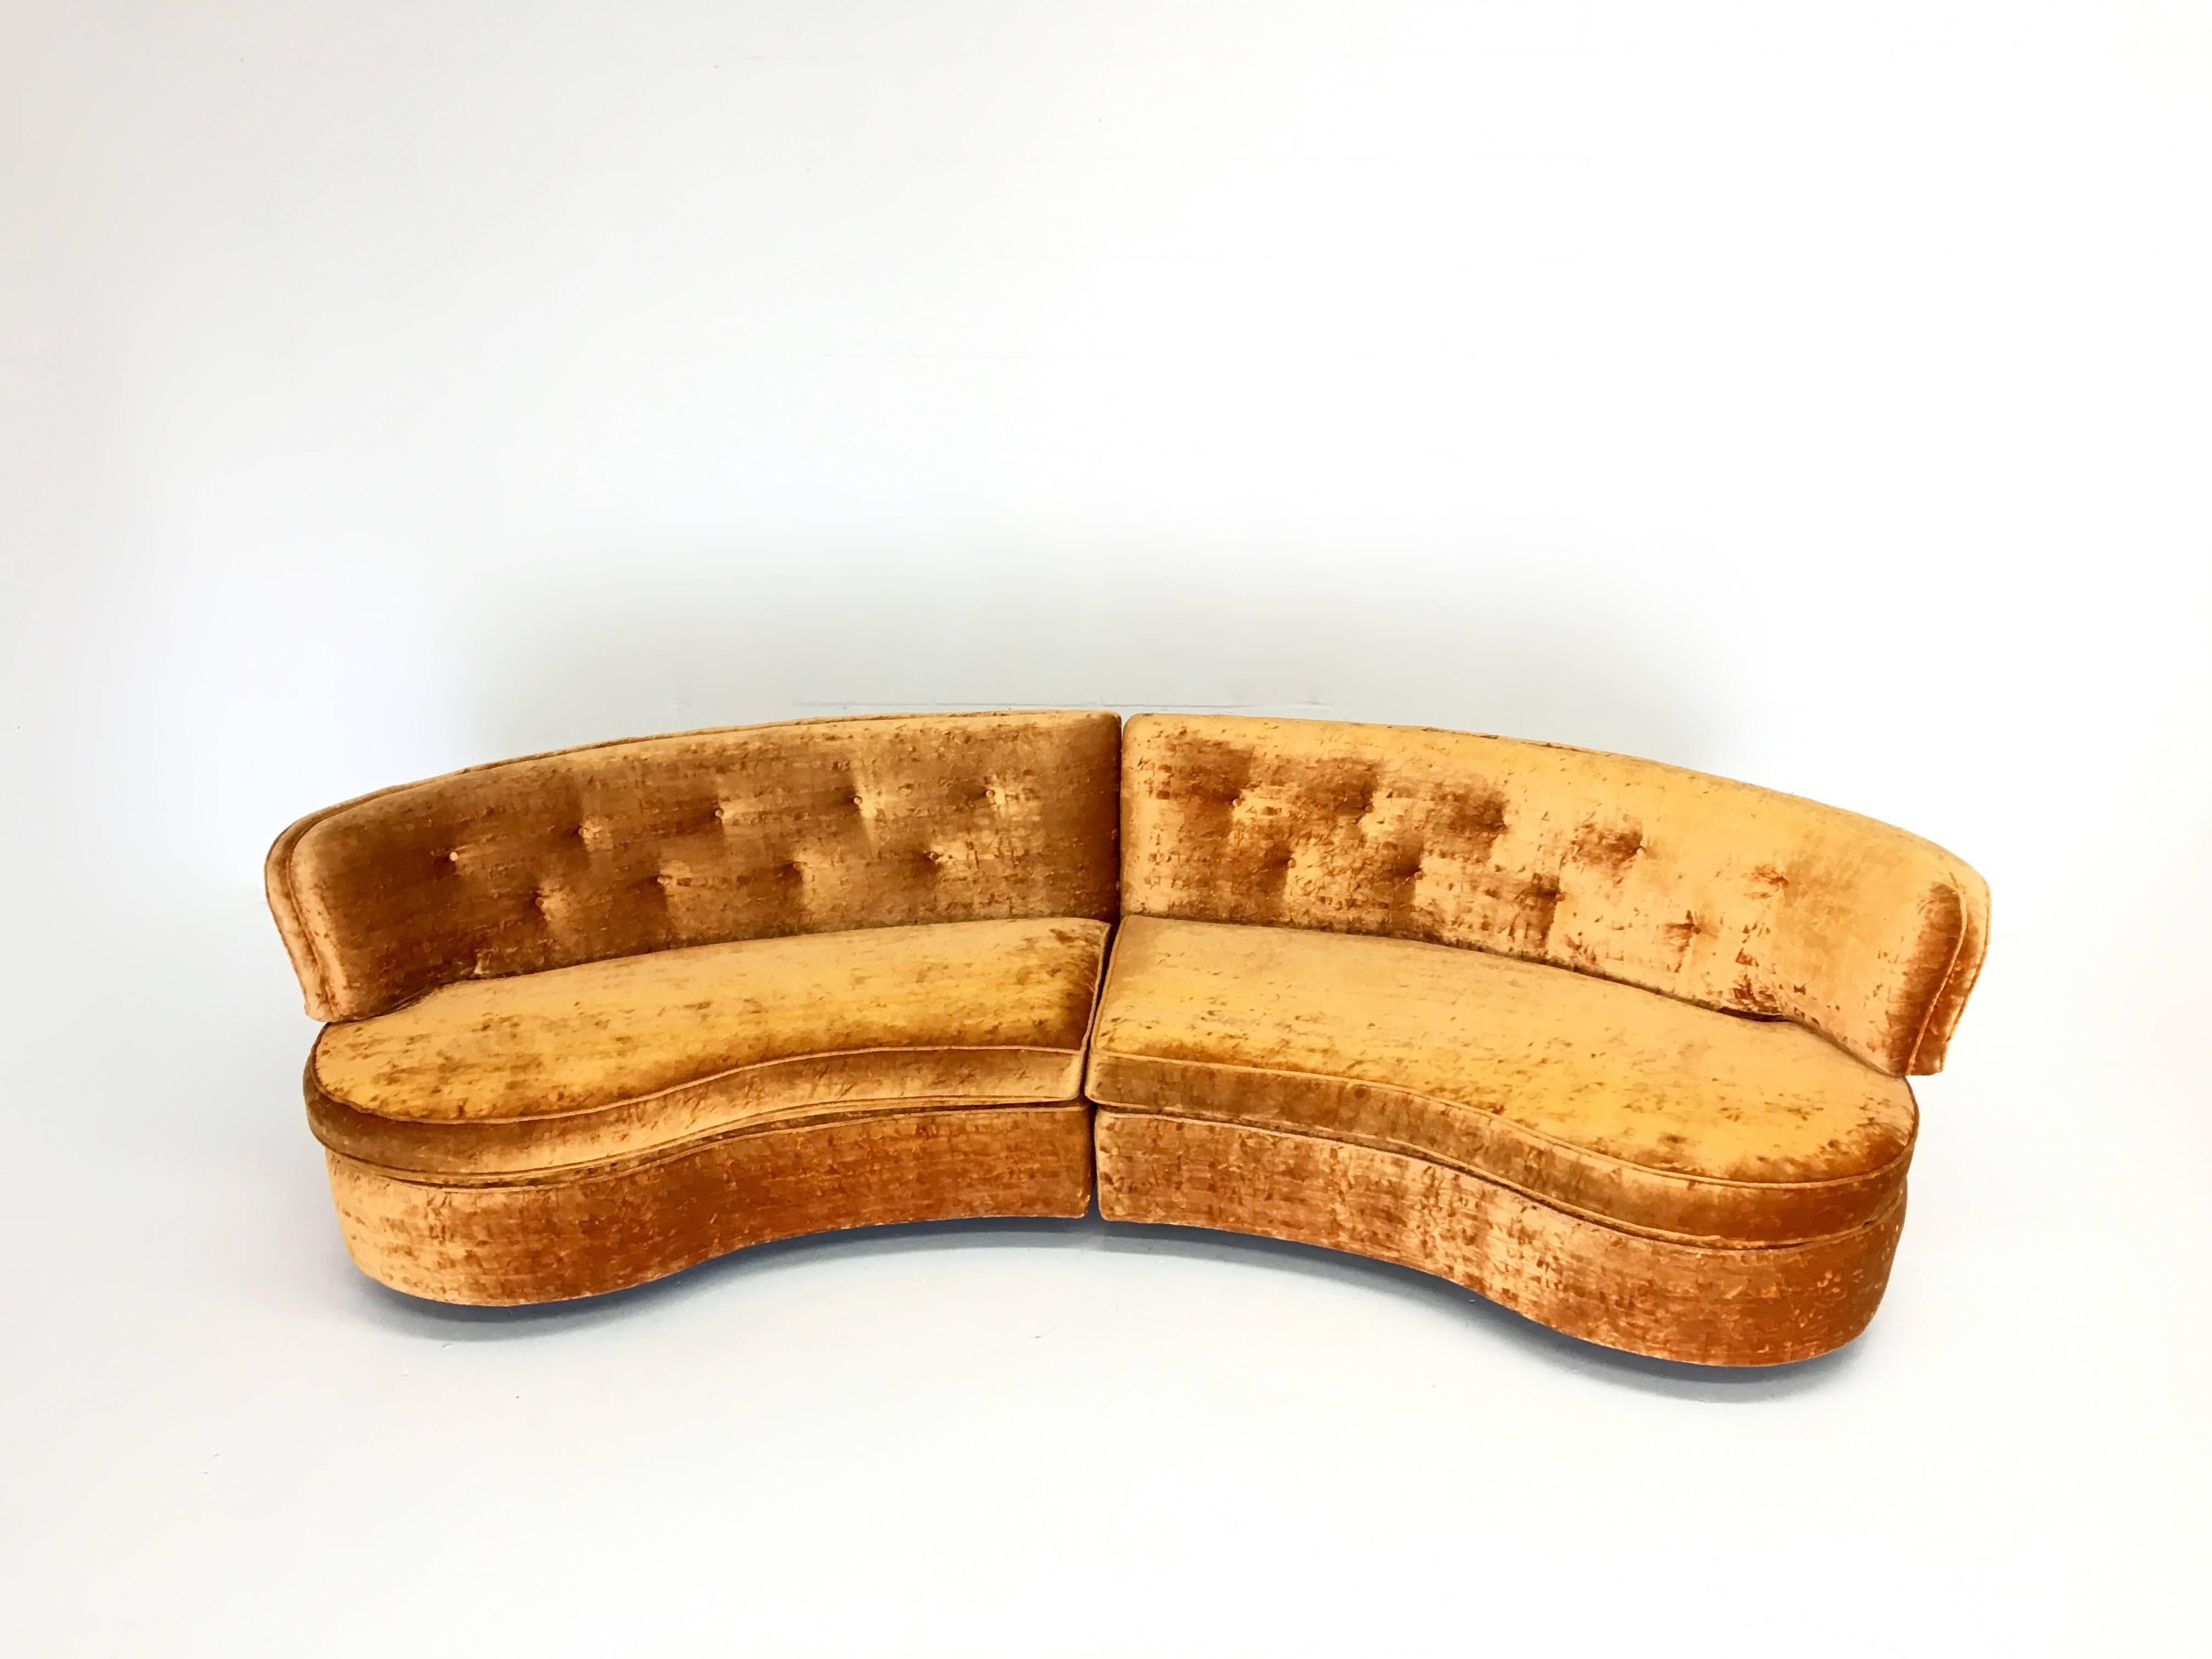 What a gorgeous, sexy sofa! This curved sofa is in super condition in an orange crushed velvet. The cushions could be replaced since they are quite firm. The fabric is in very good condition, though some may want to reupholster. The shape of the two